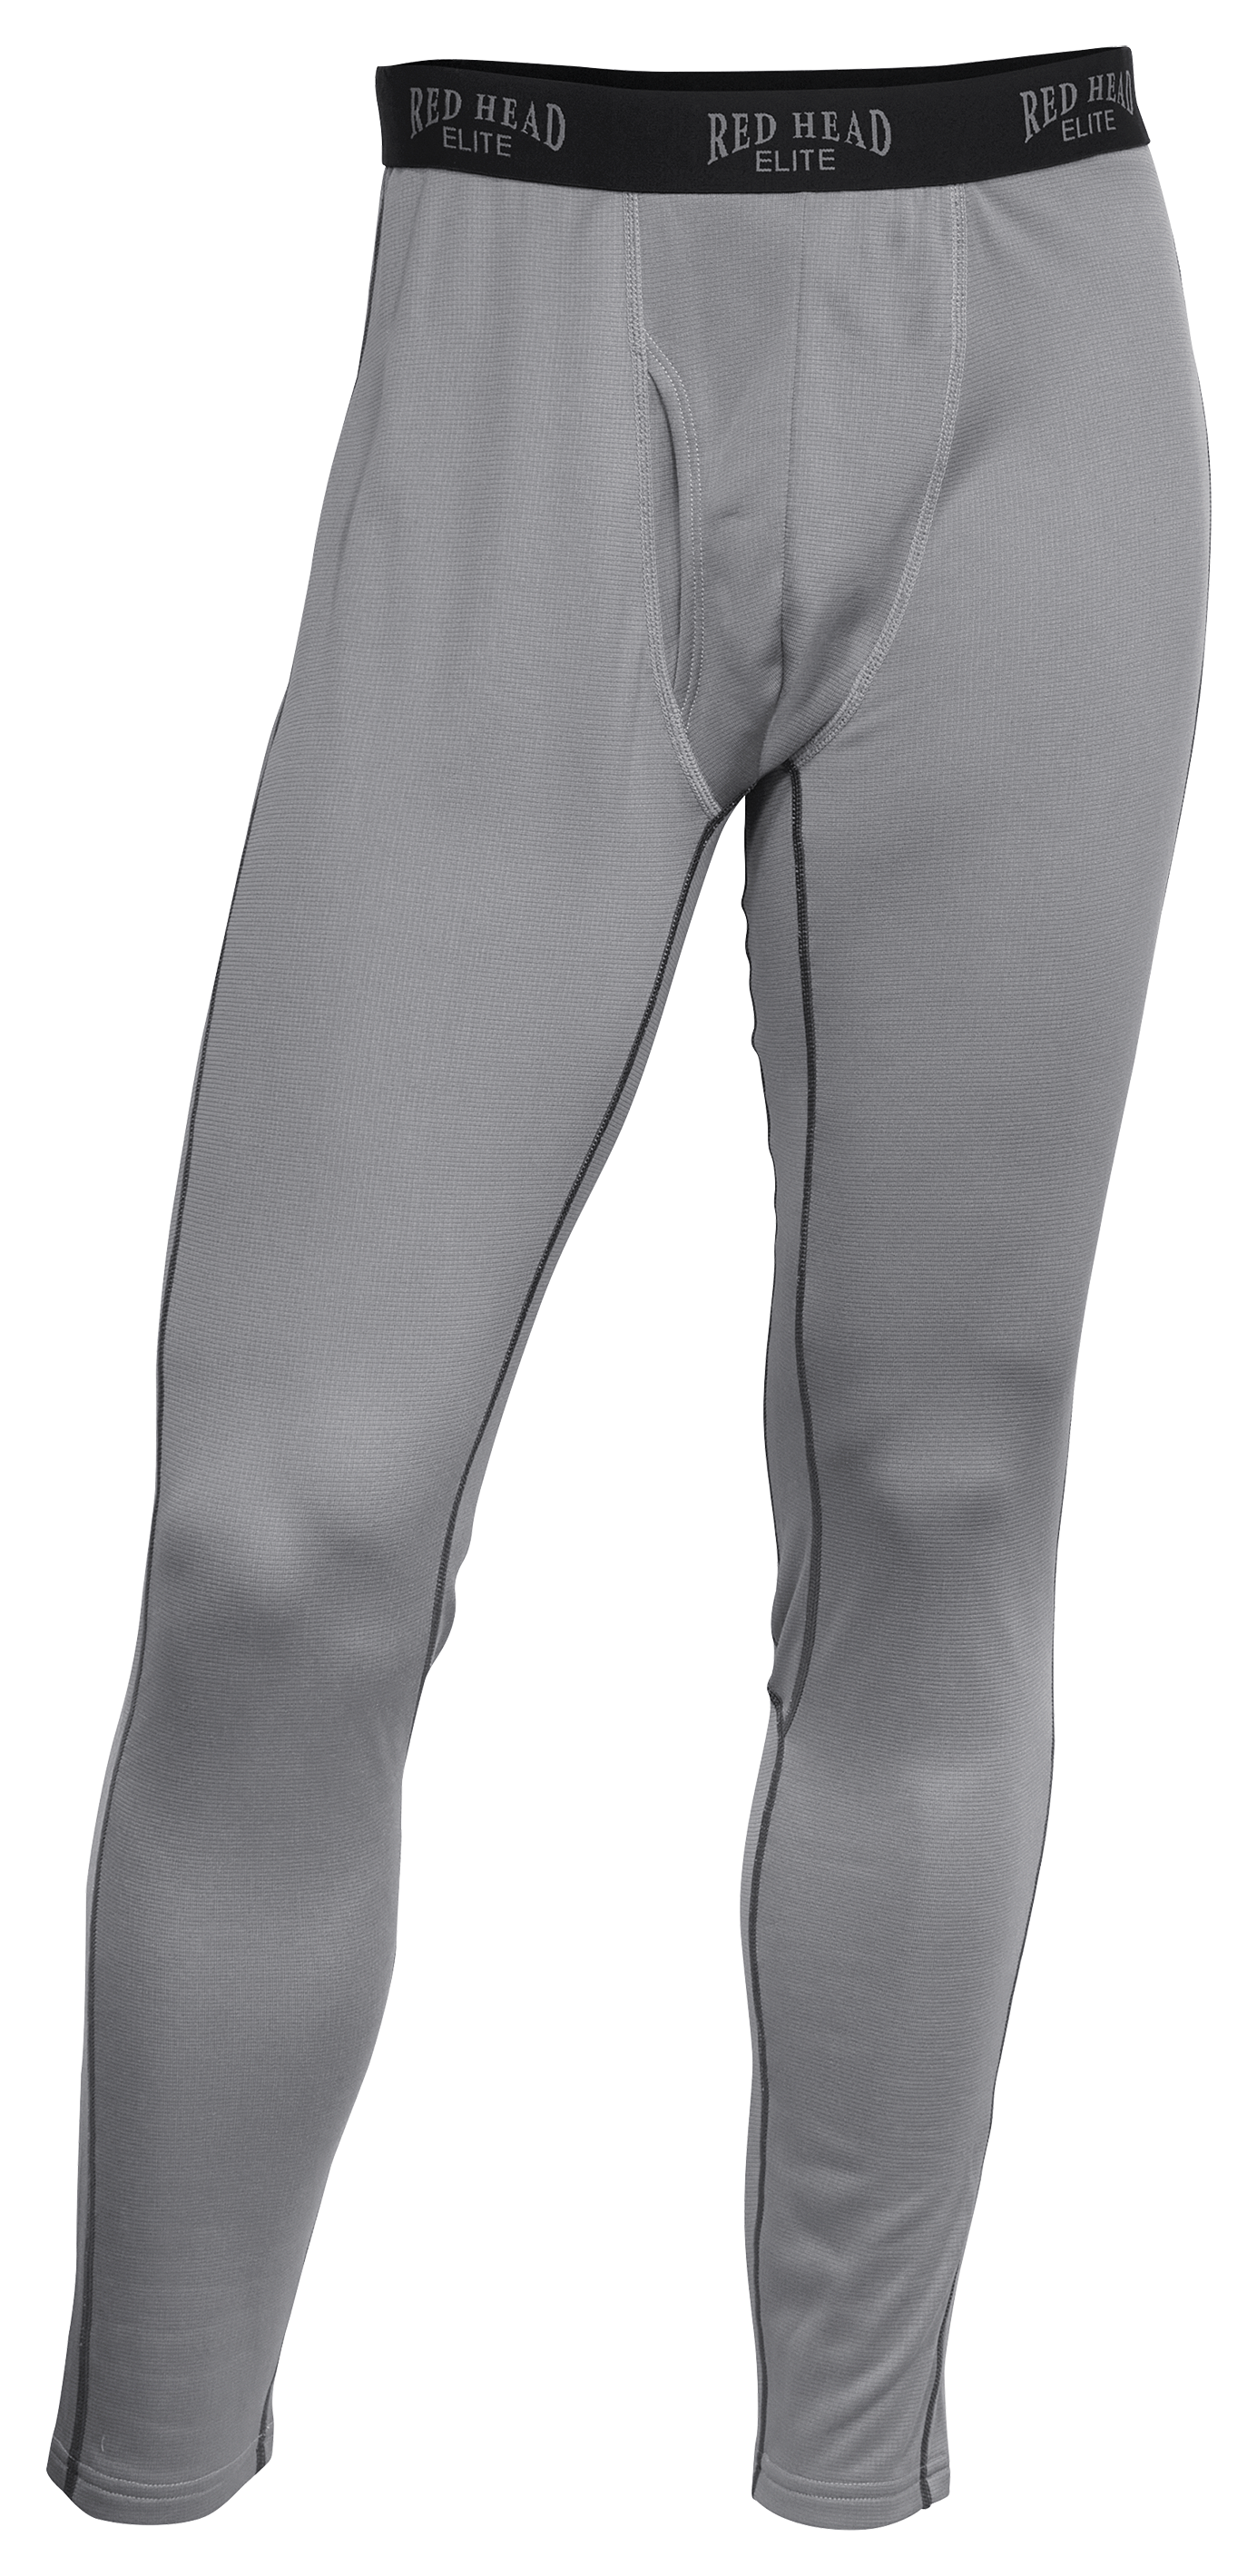 Cabela's E.C.W.C.S. Midweight Base Layer Pants for Men